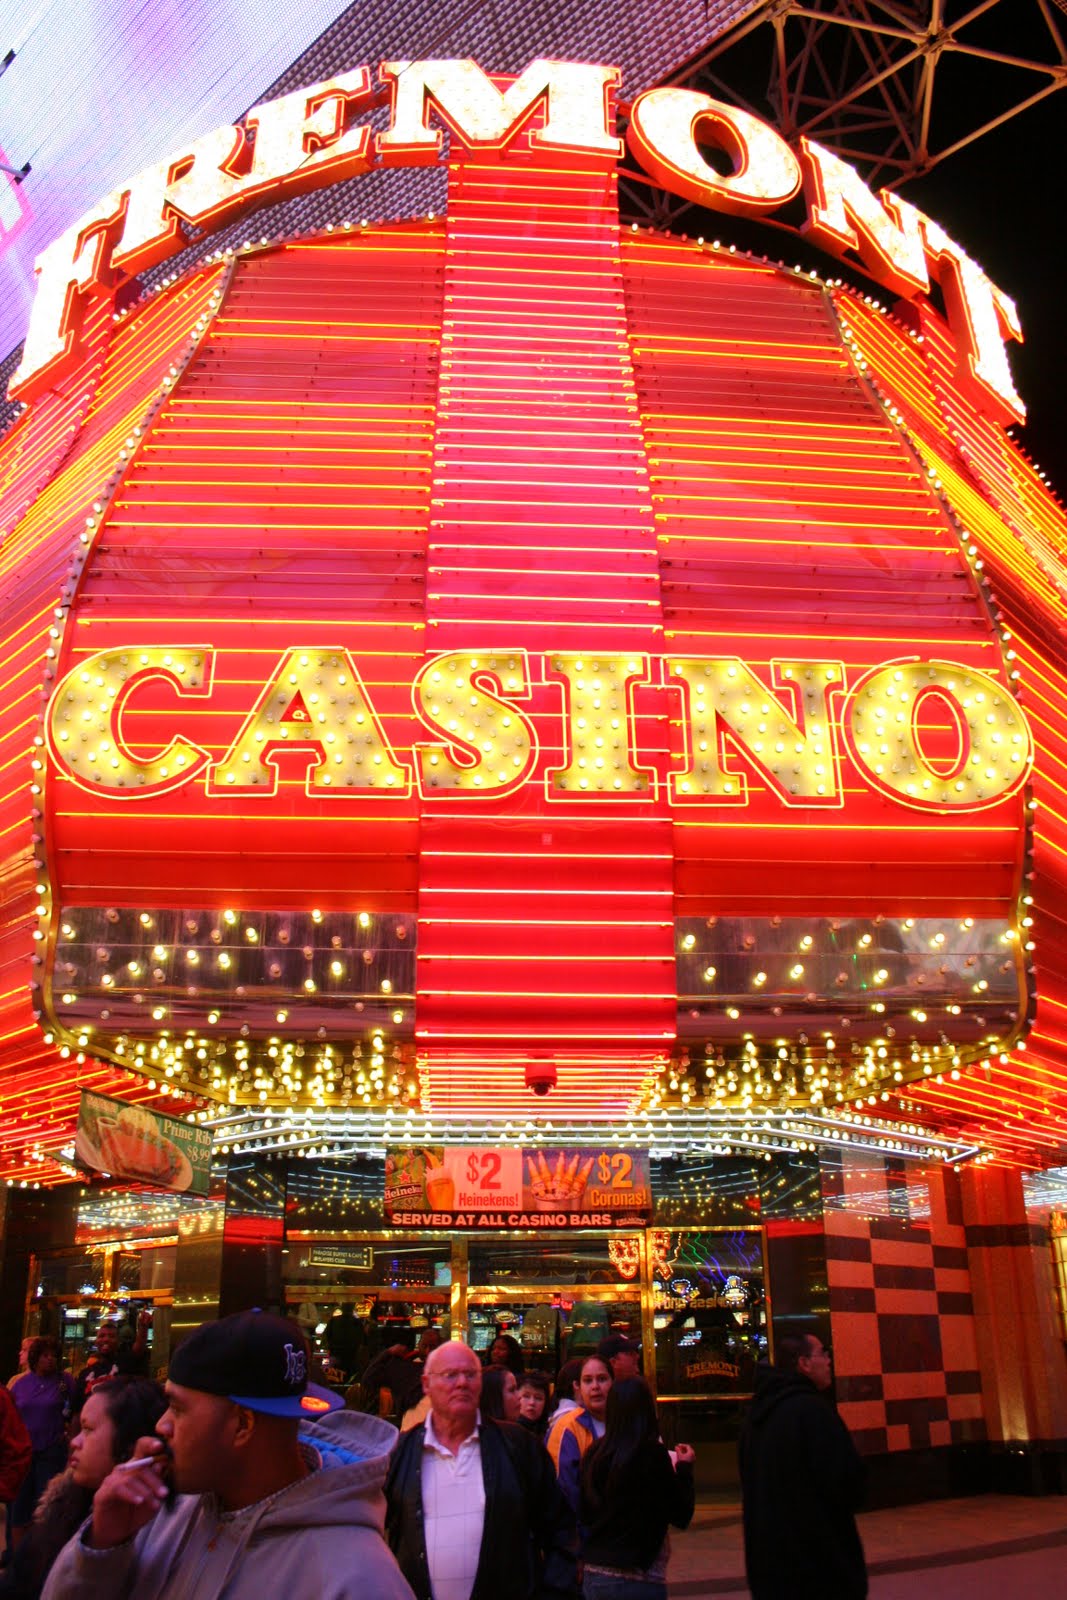 How To Determine An Online Casino Game That You Want